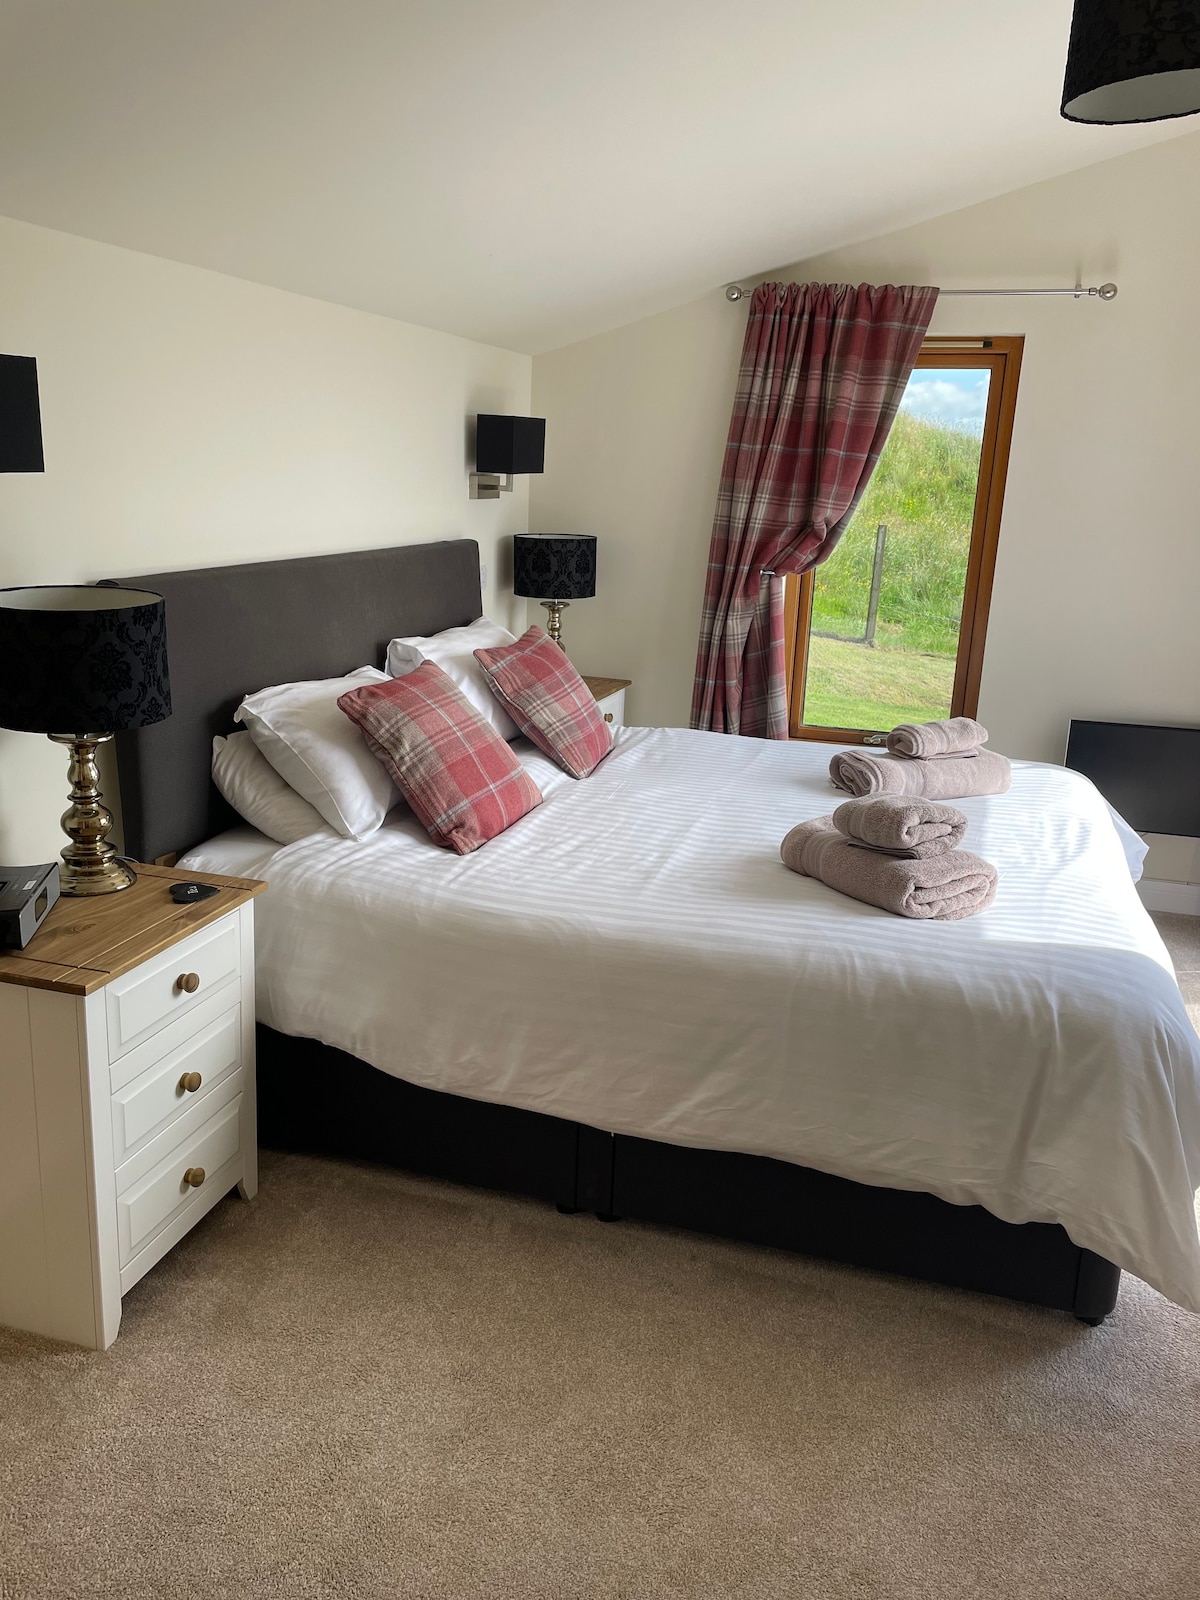 Creag an Loch Self Catering